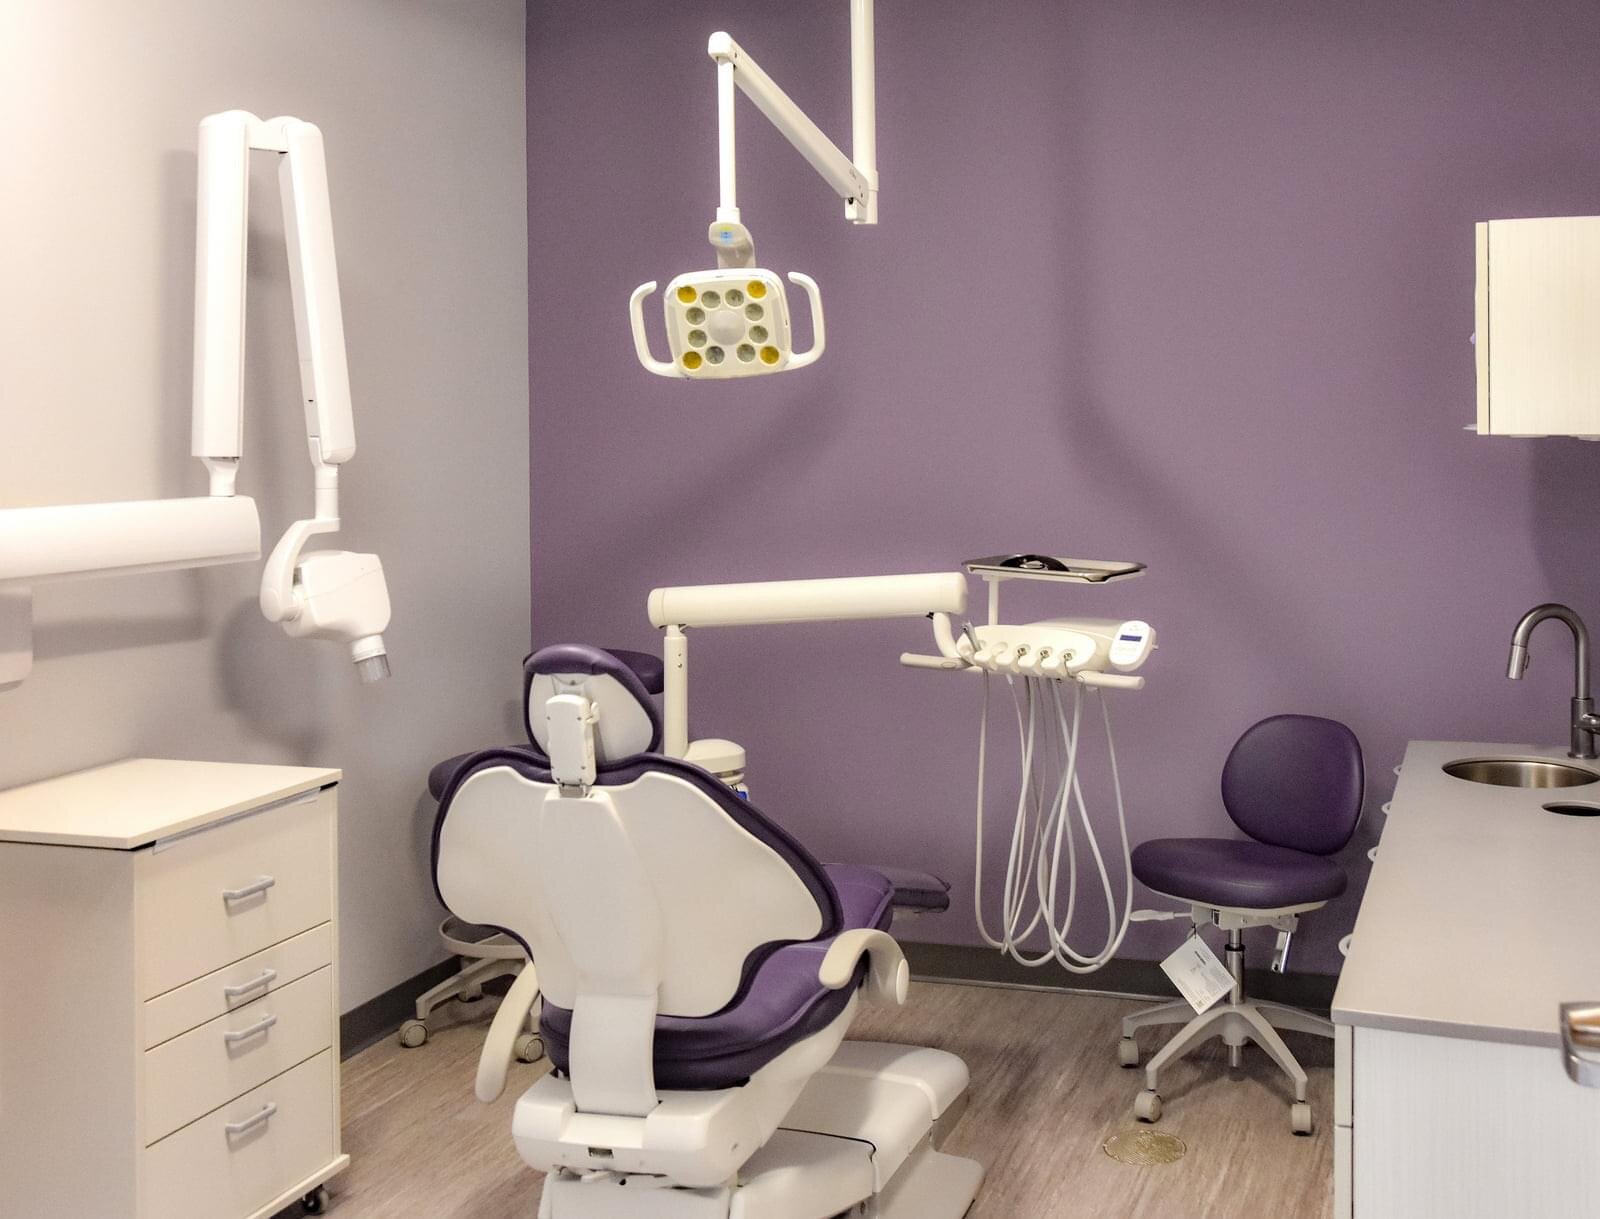 Dental treatment room (photo credit to Mitchell Grosky)